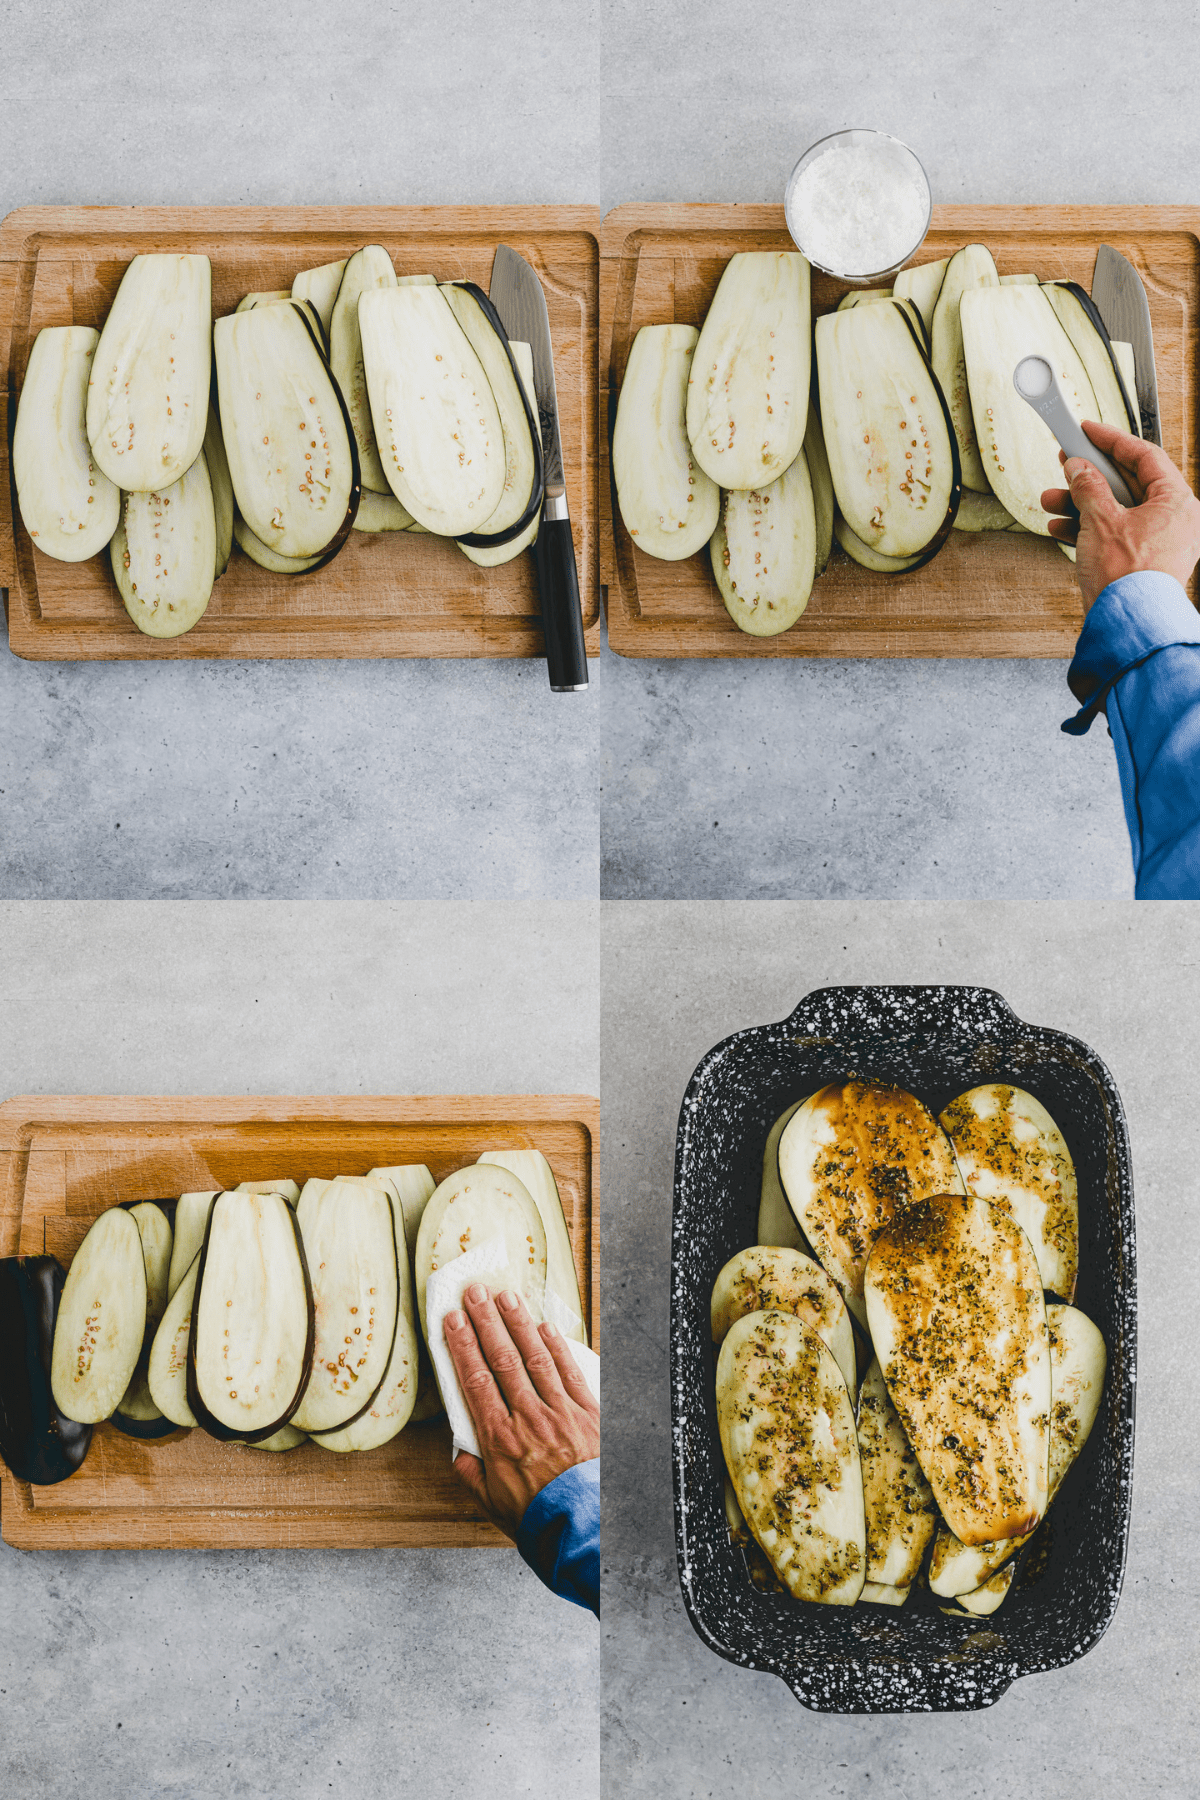 How To Grill Eggplant Recipe Step 1-4